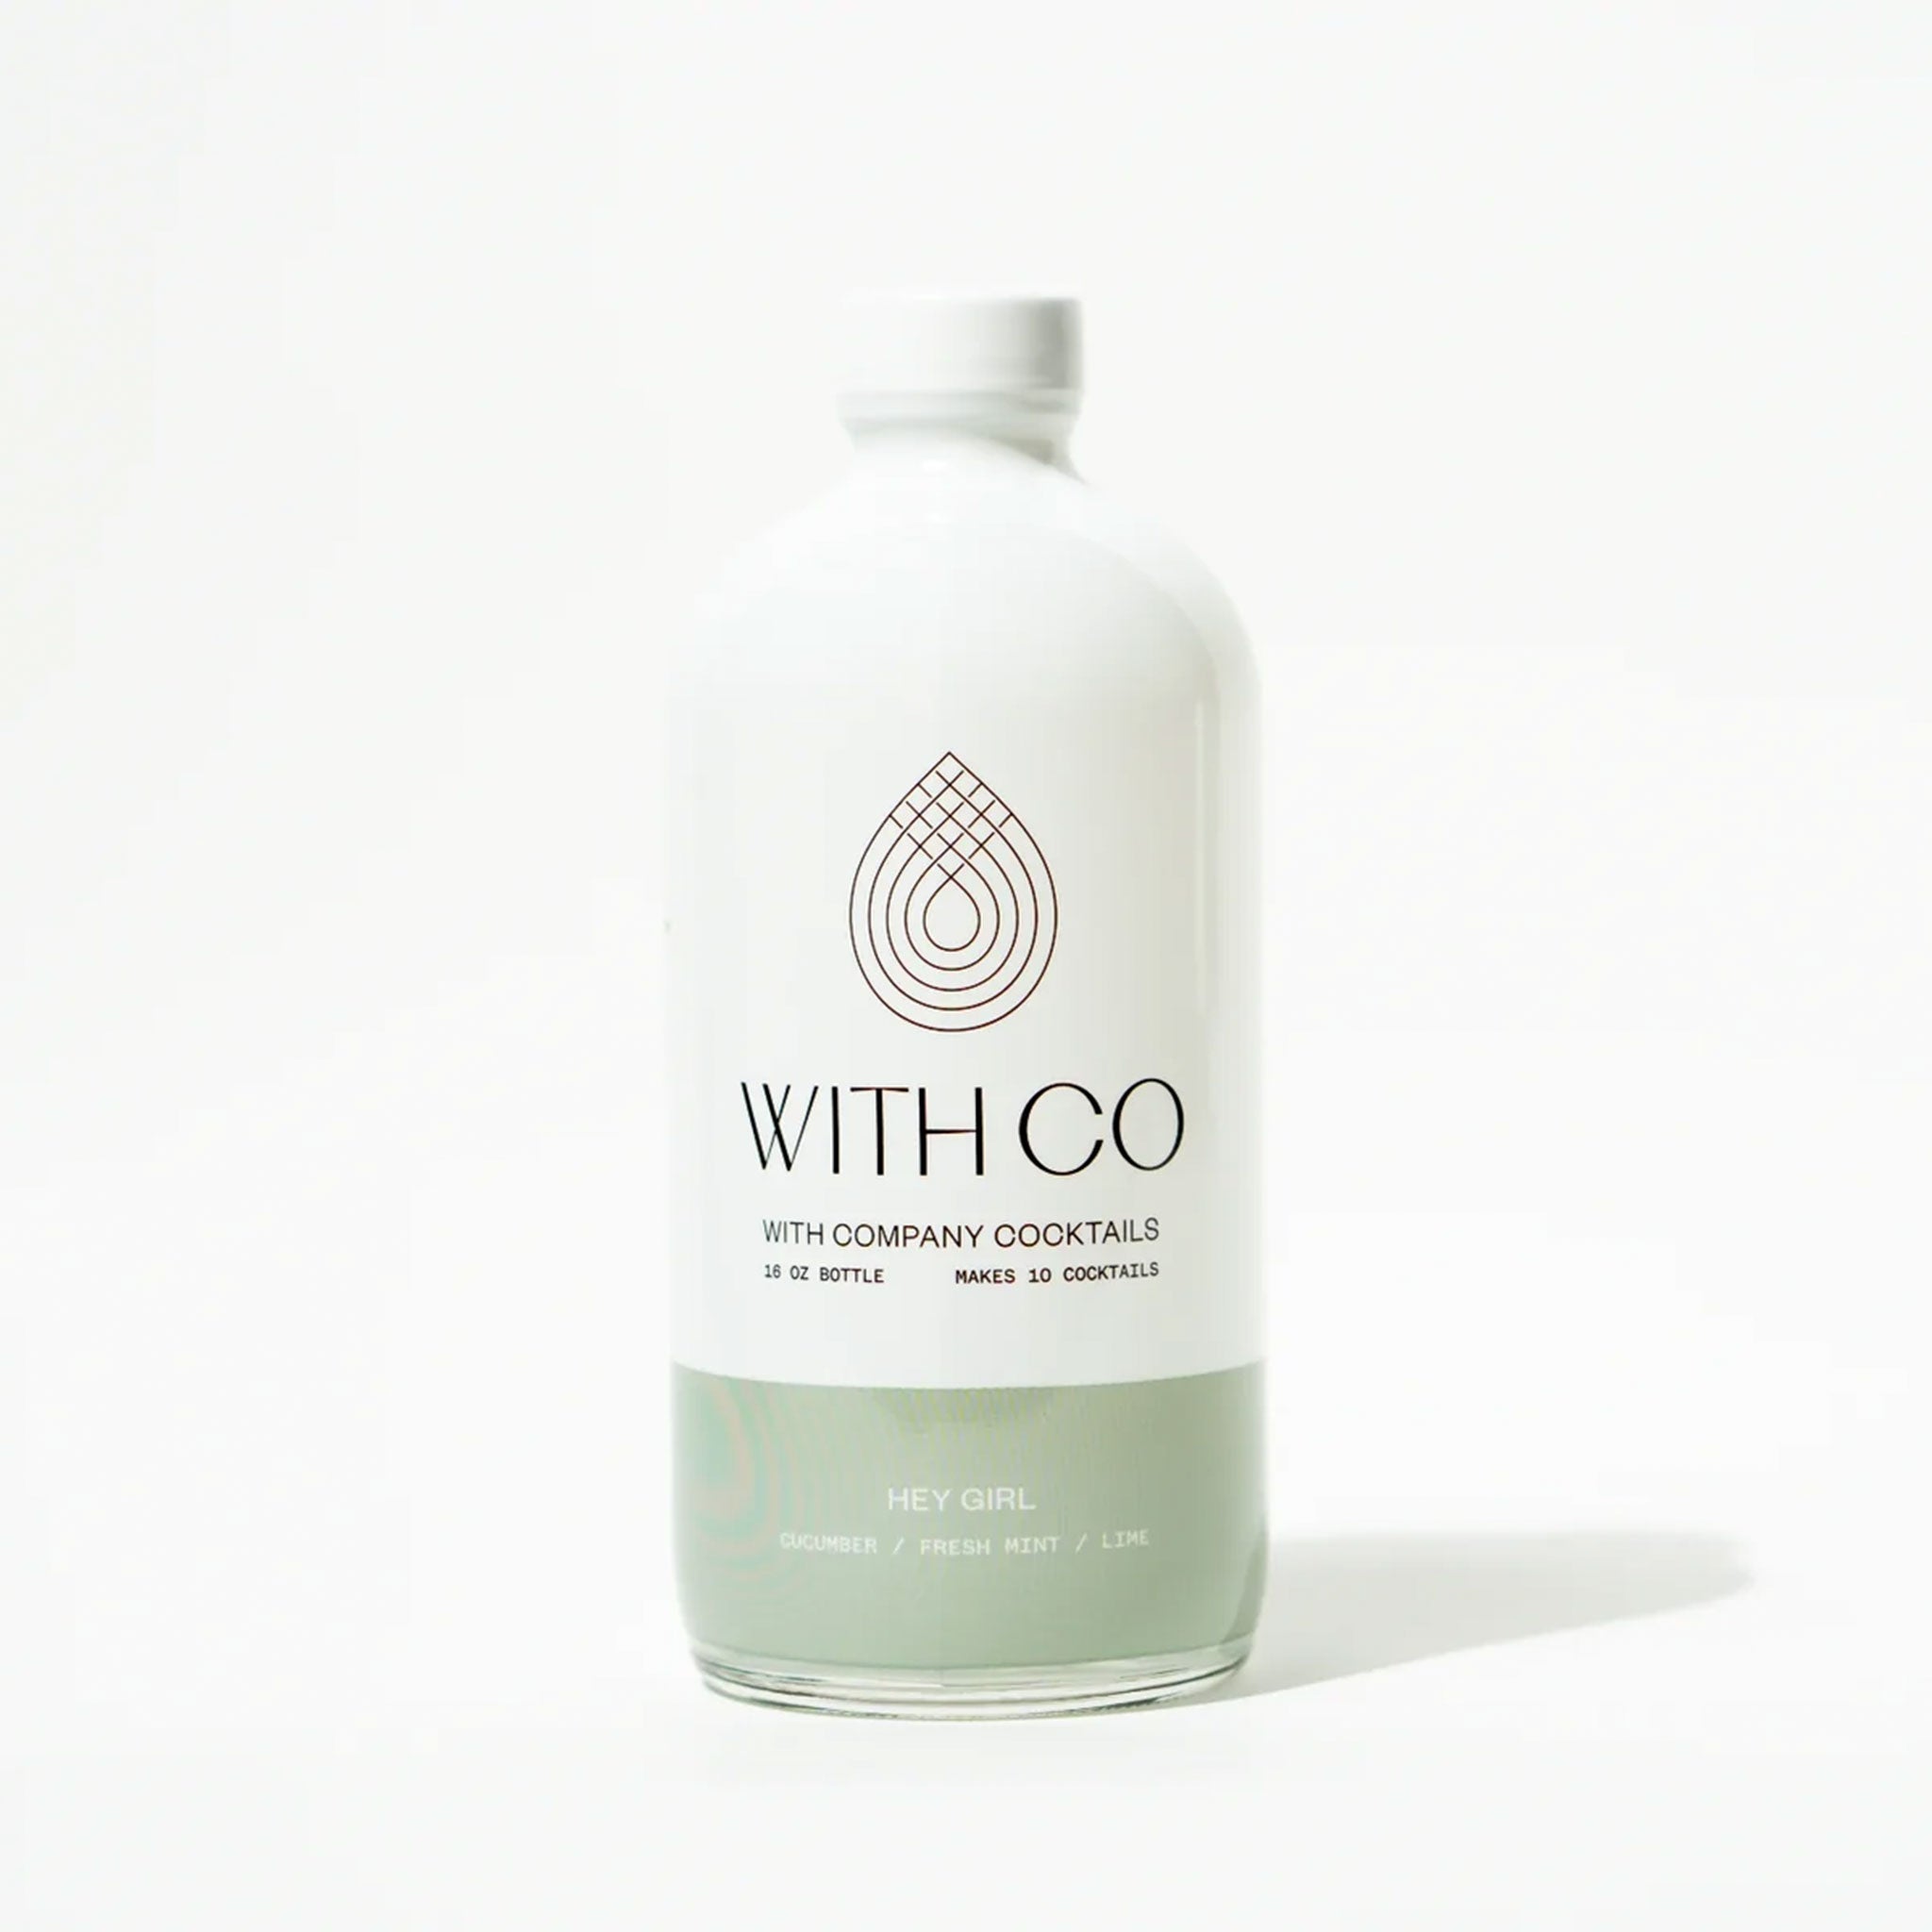 A white container with a sage green bottom half along with the brand "With Co" written in black text along with the name of the cocktail mix "Hey Girl" in white text on the green background.